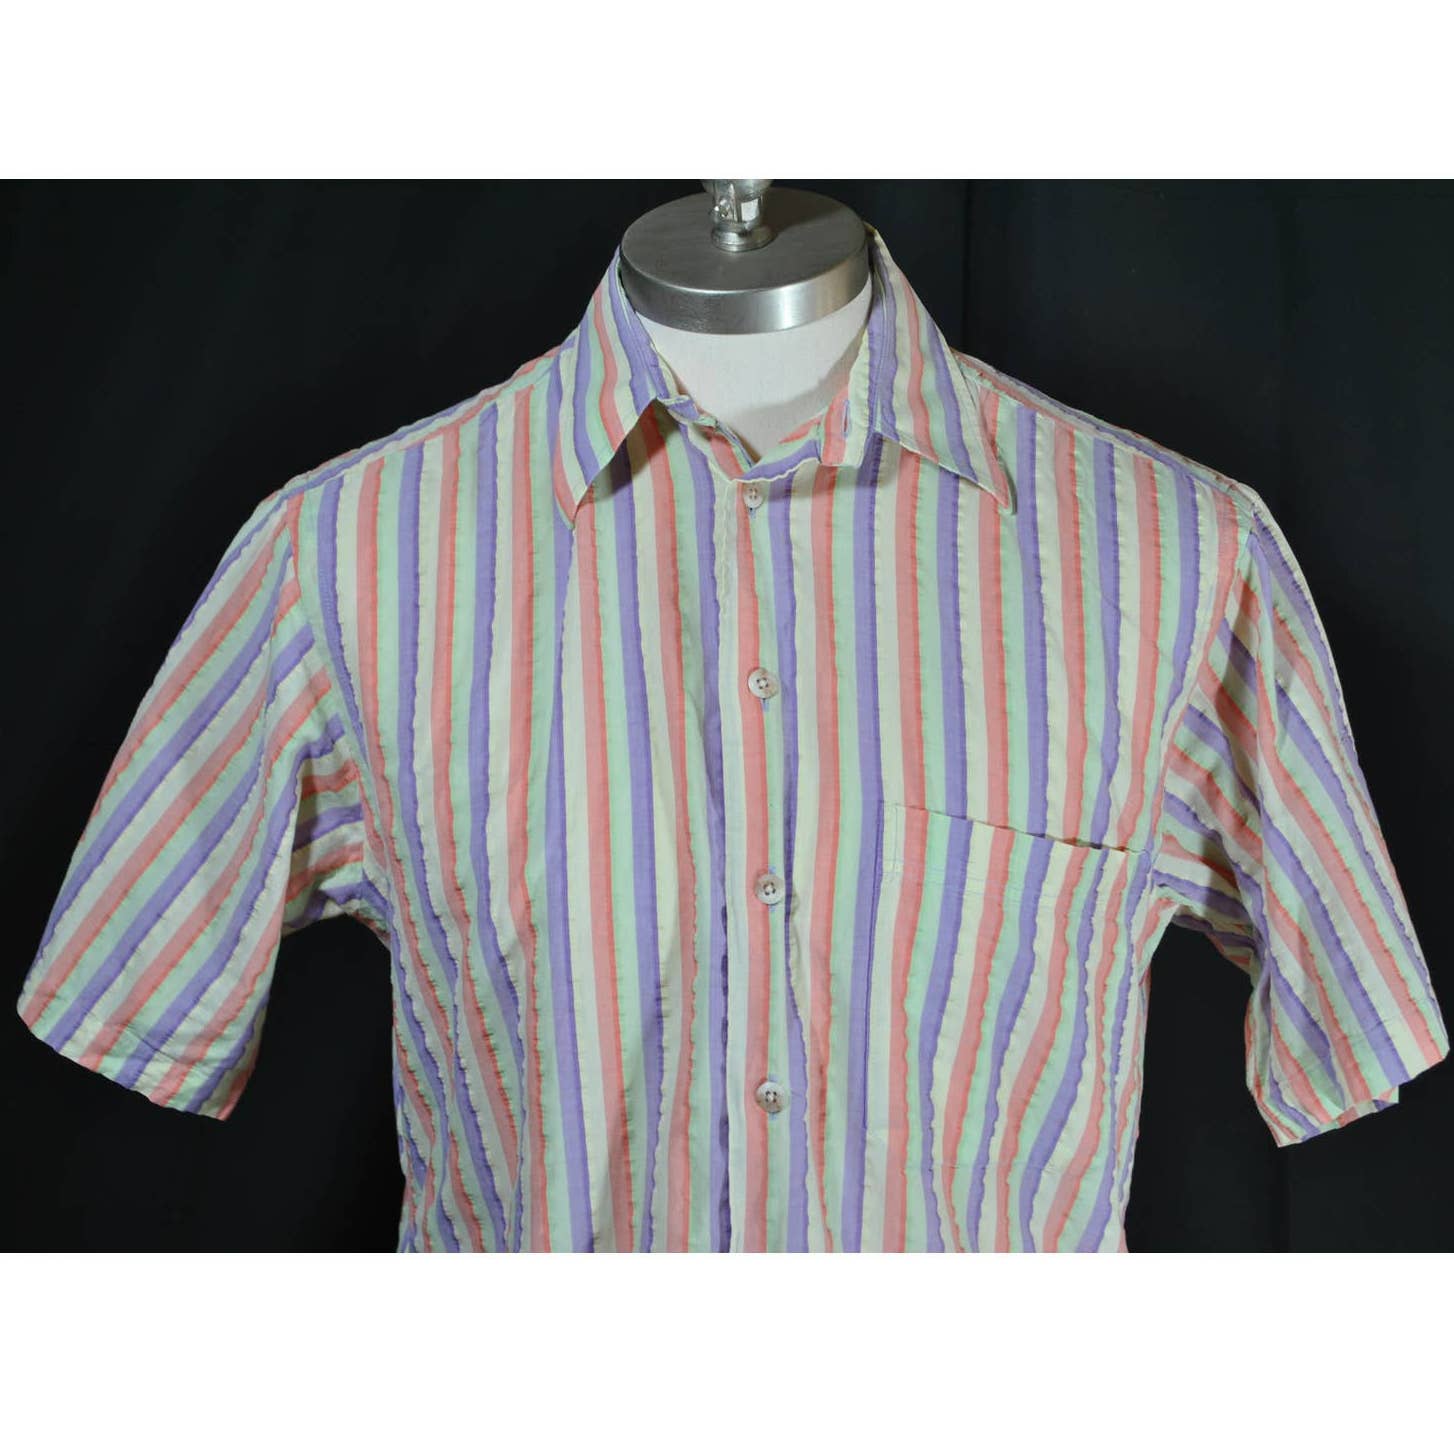 Neiman Marcus Striped Purple Yellow Pink Green Button Up Shirt - S